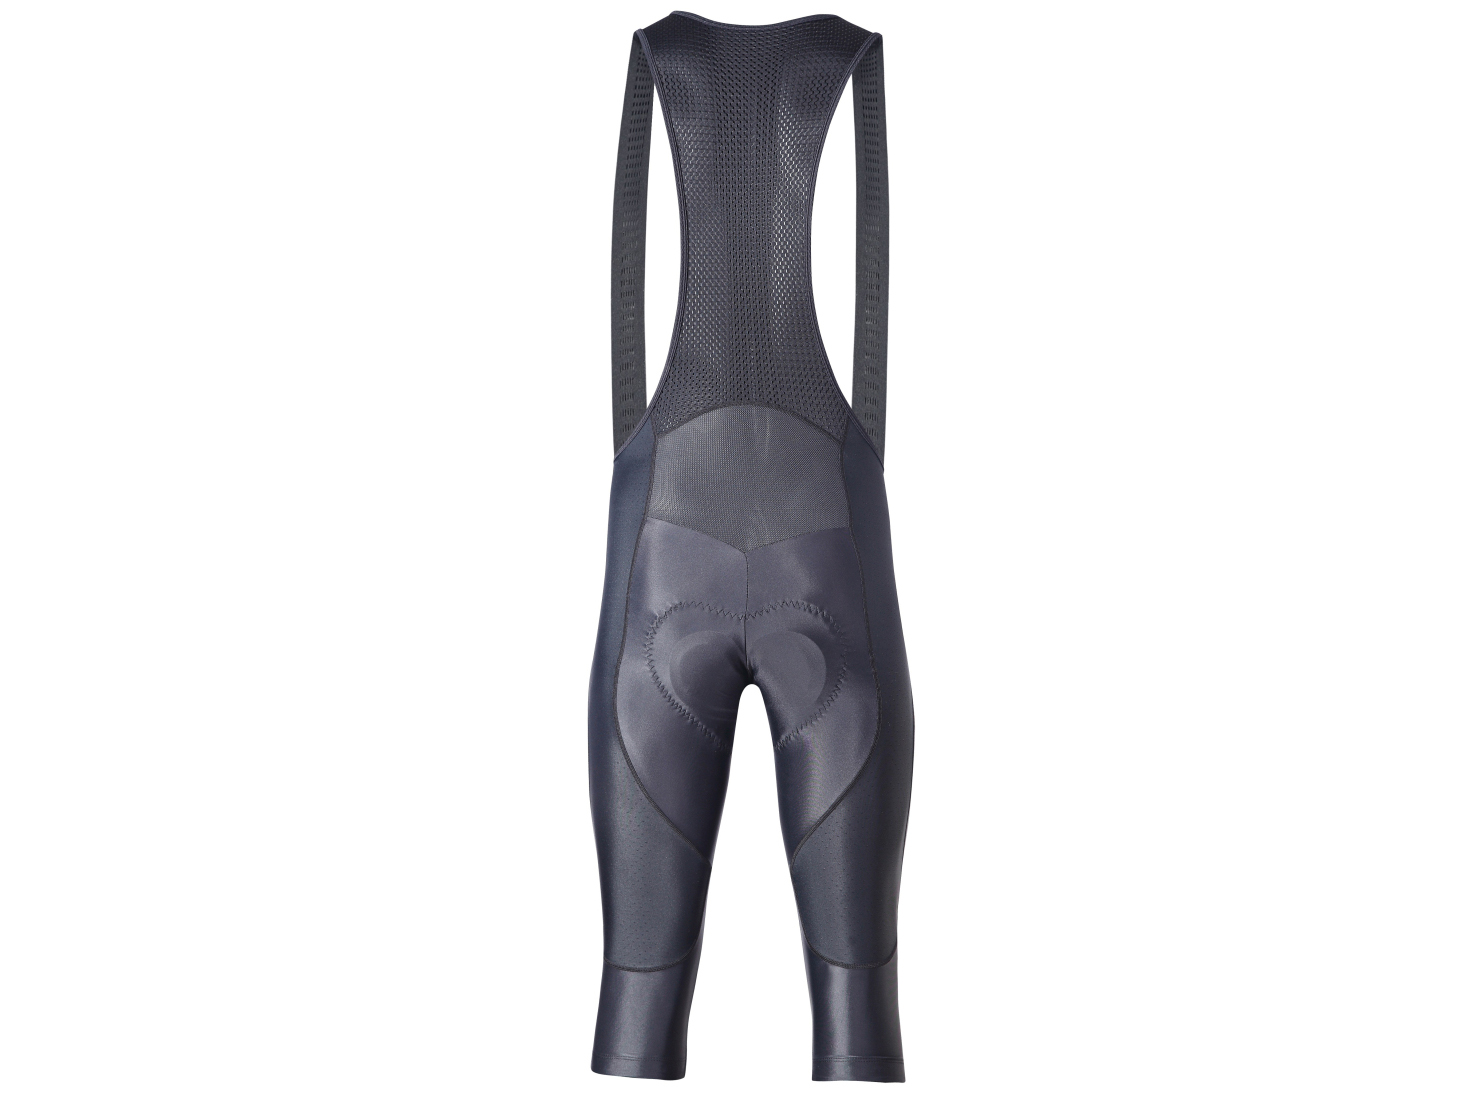 Men’s knitted bicycle Bib short with pad